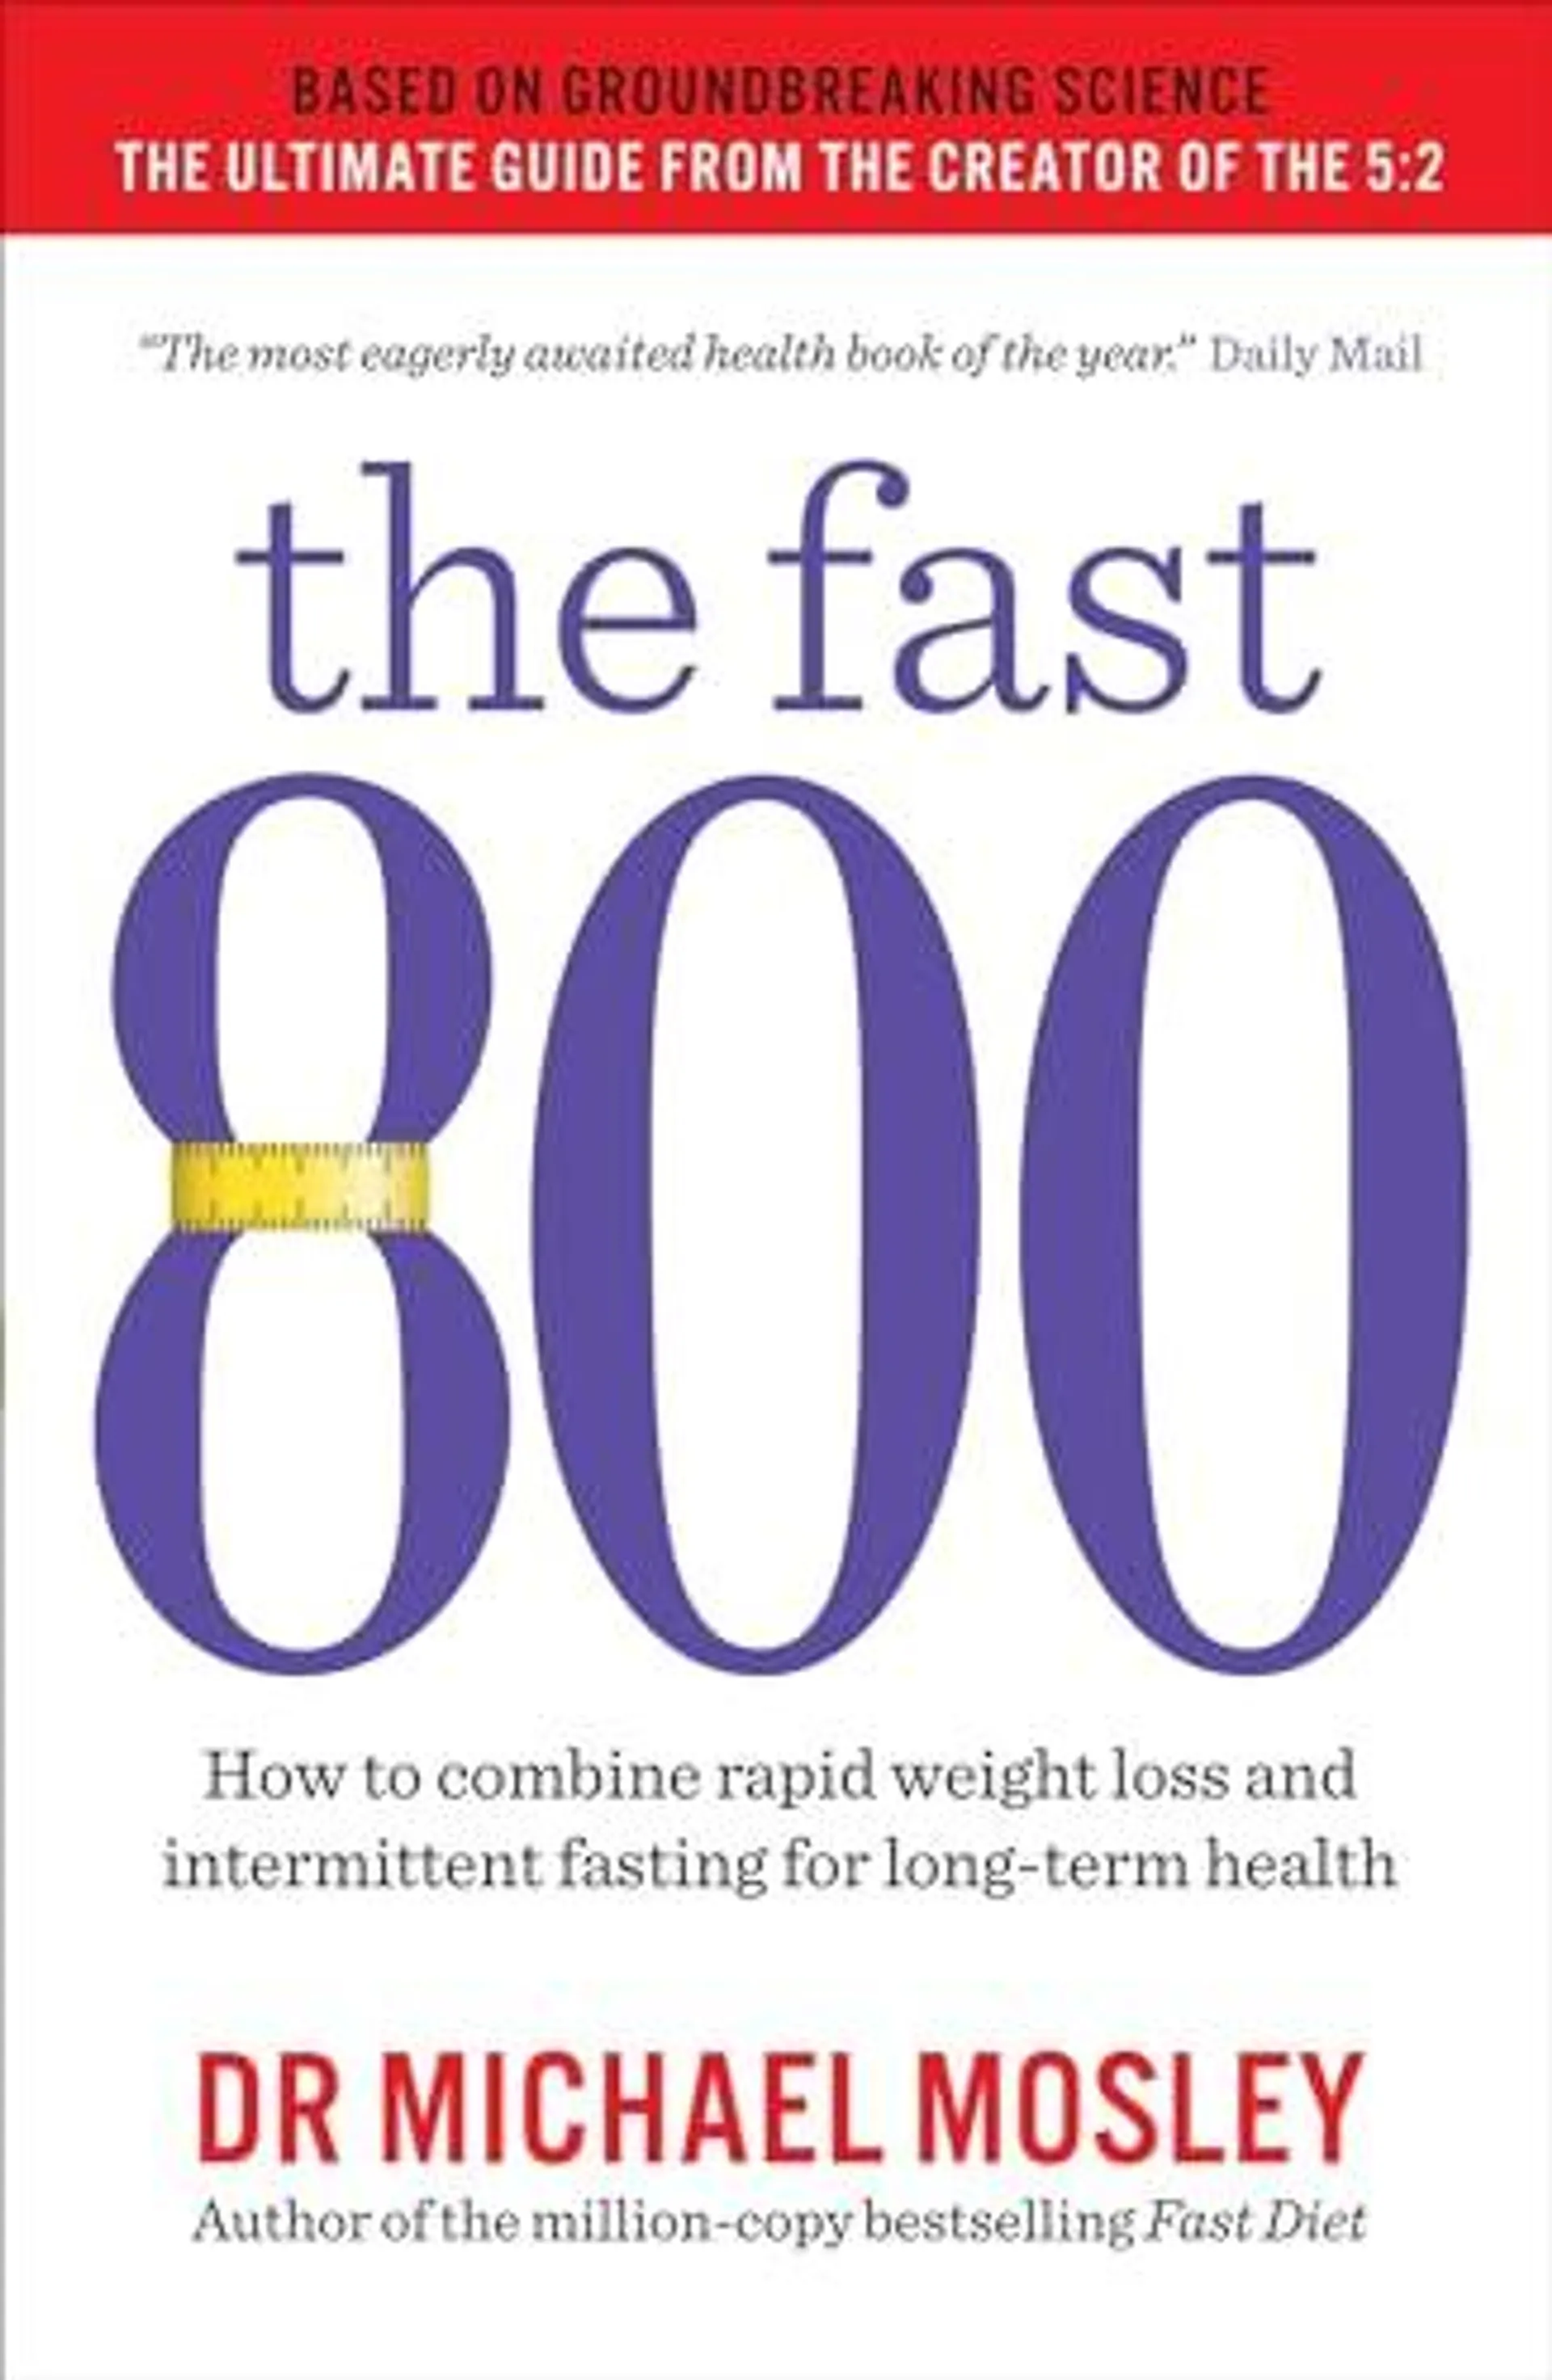 The Fast 800 by Dr Michael Mosley